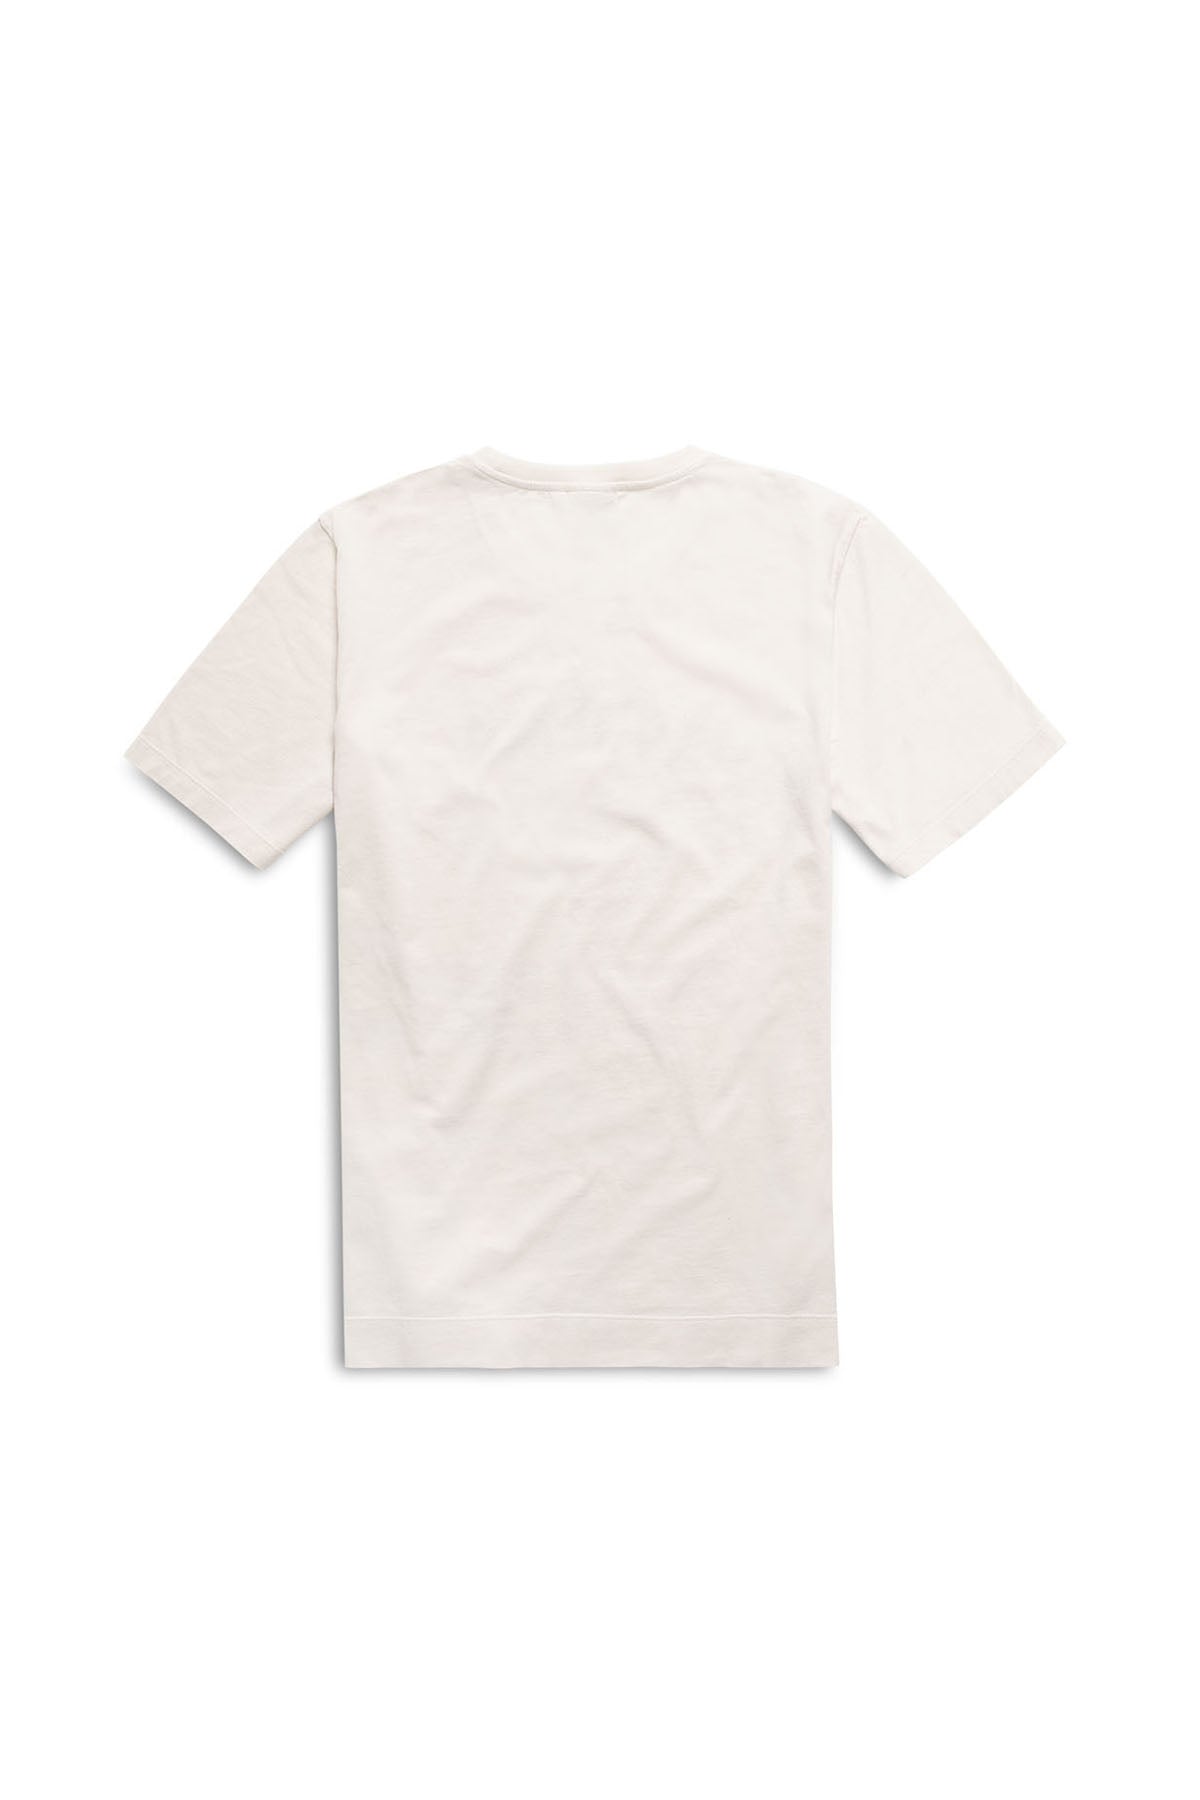 Shop Tee Off-White Red